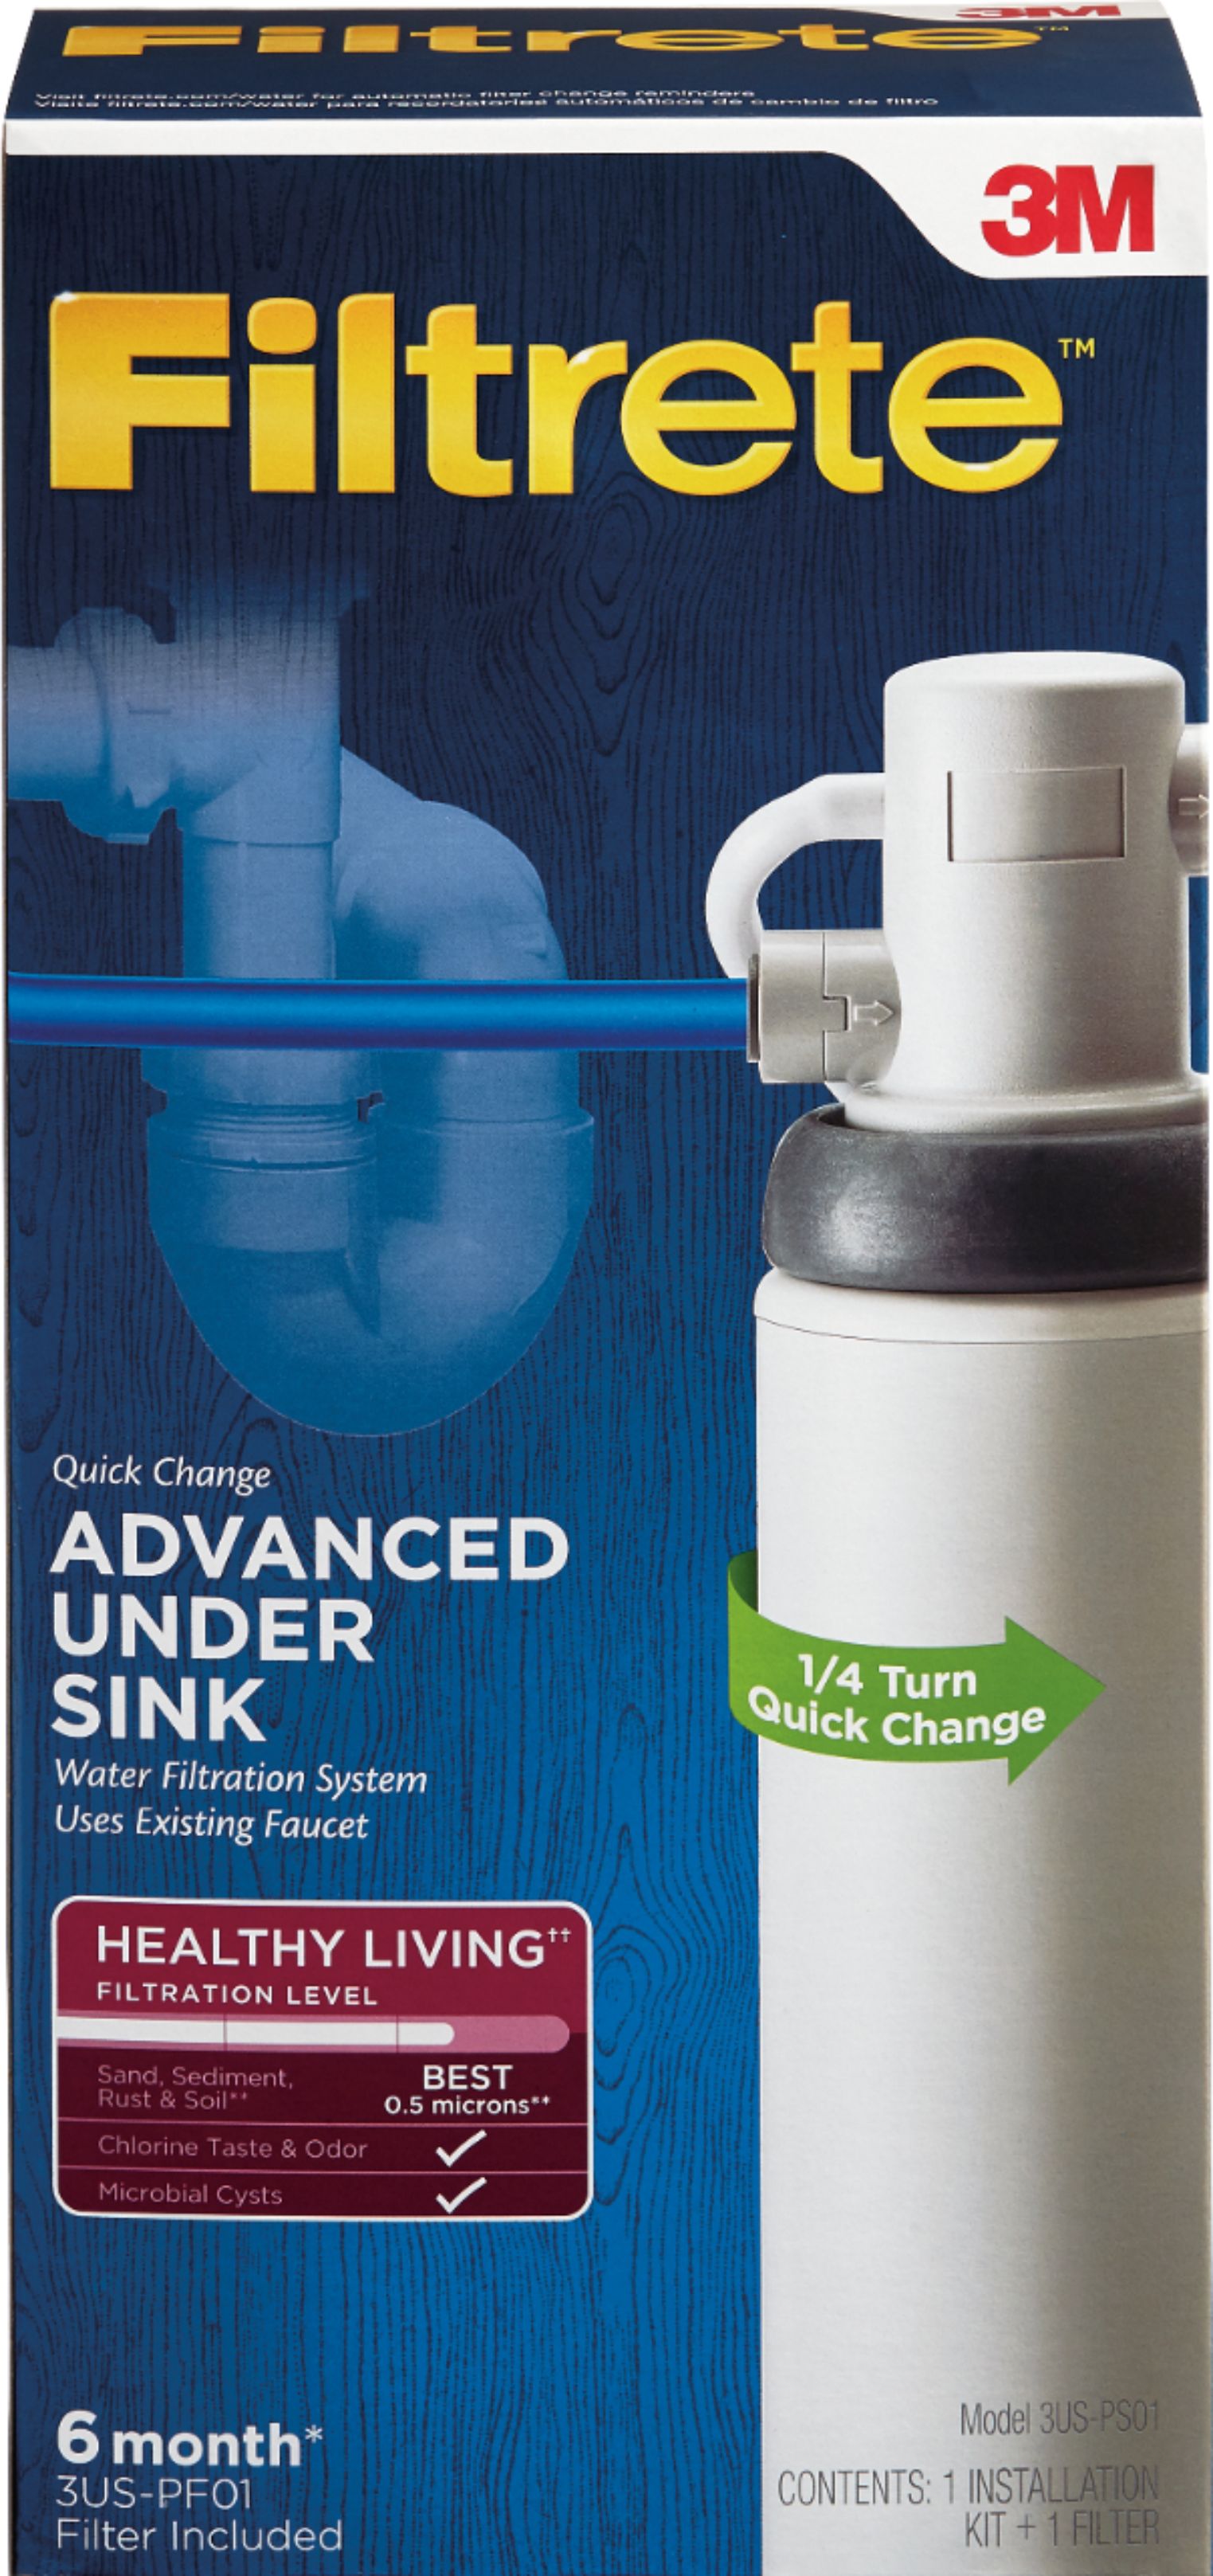 Erie active carbon water filter 1 Cuft Tempo - Sanresurs